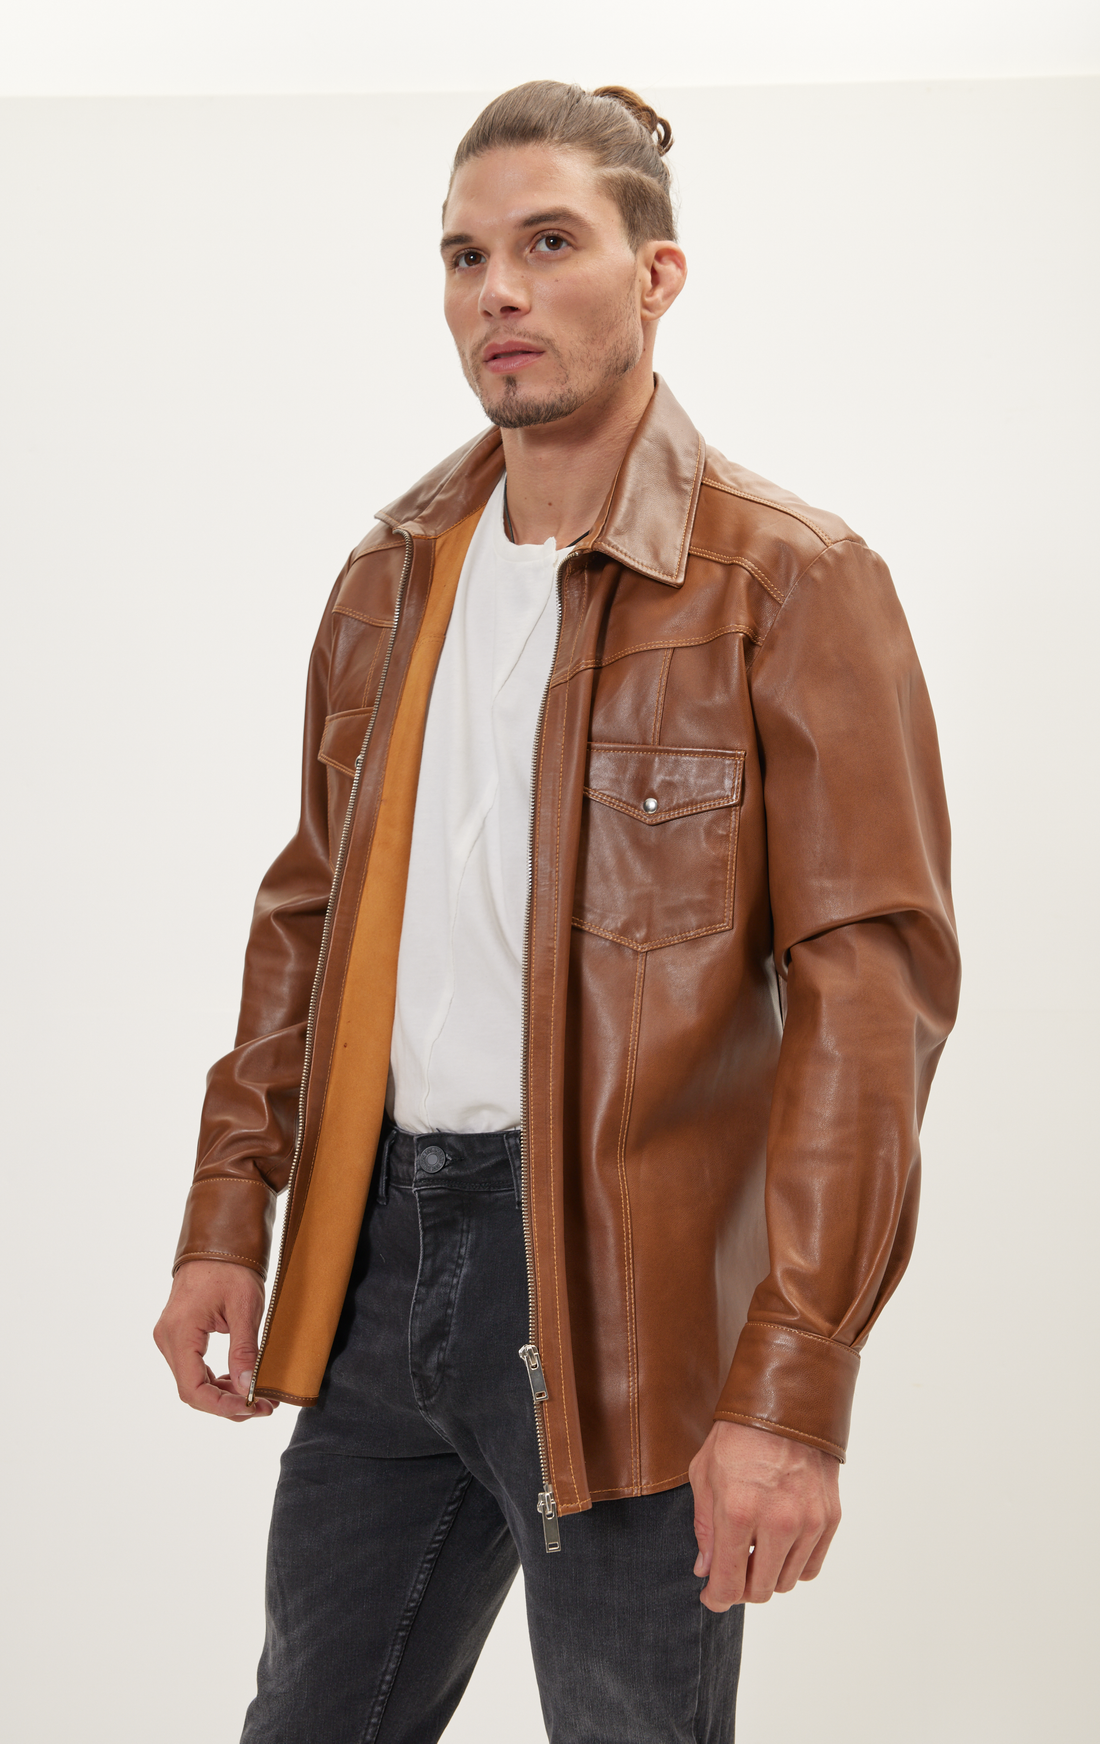 Z Genuine Leather Shirt With Zipper Closure - Brown